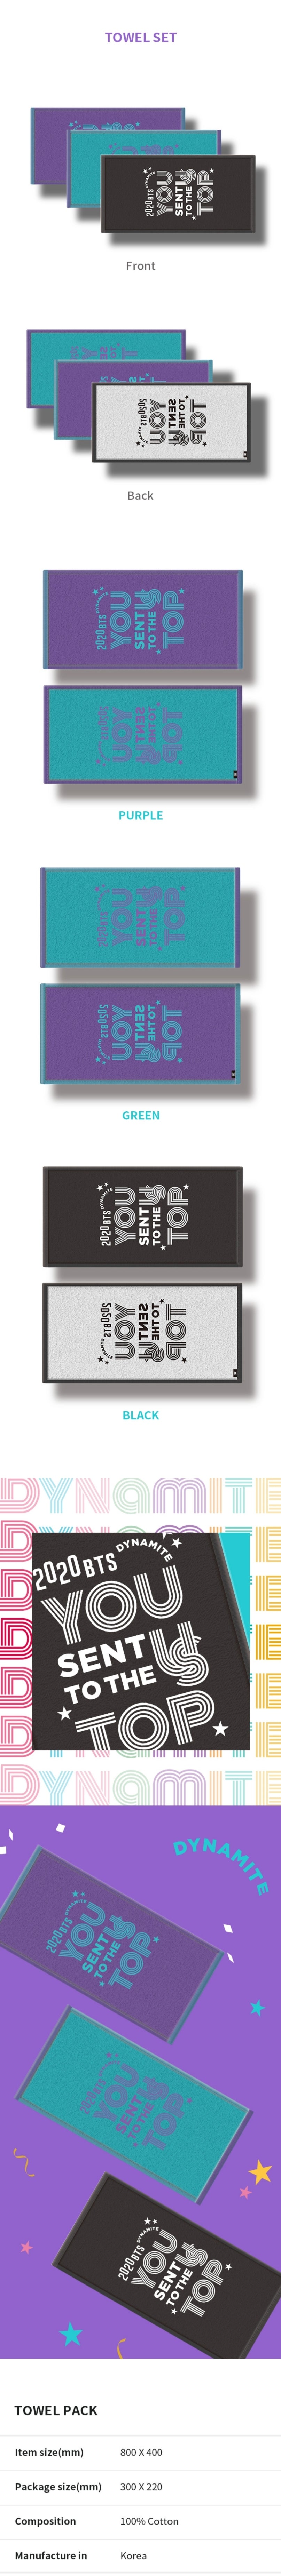 BTS Dynamite Celebration of Inical Percchandise - Tafel Pack 01